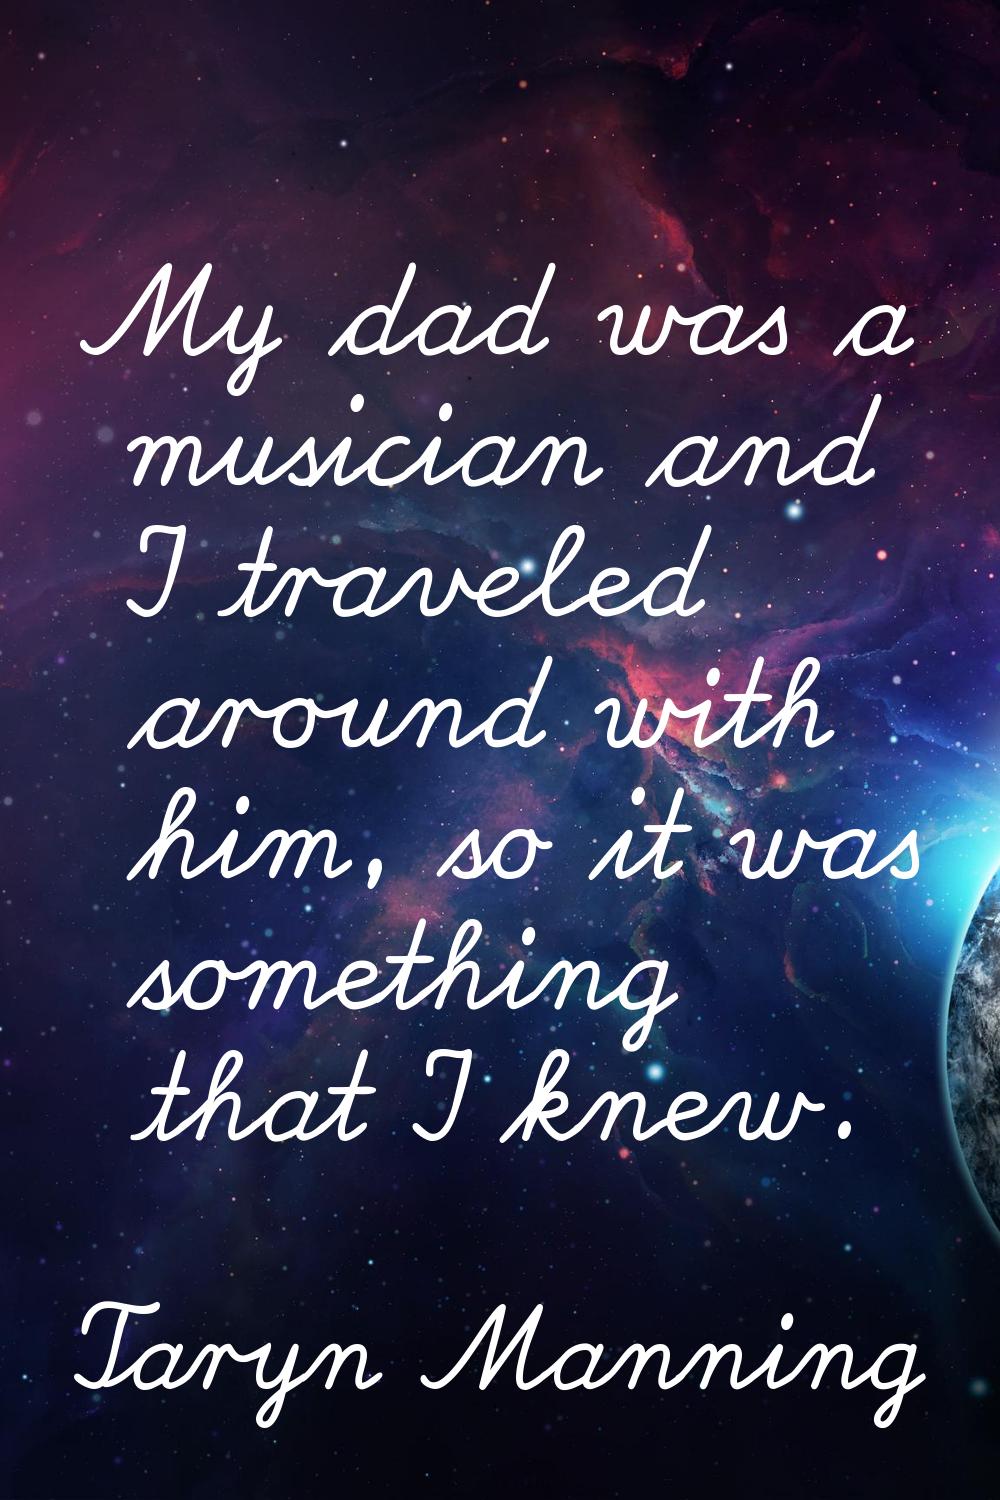 My dad was a musician and I traveled around with him, so it was something that I knew.